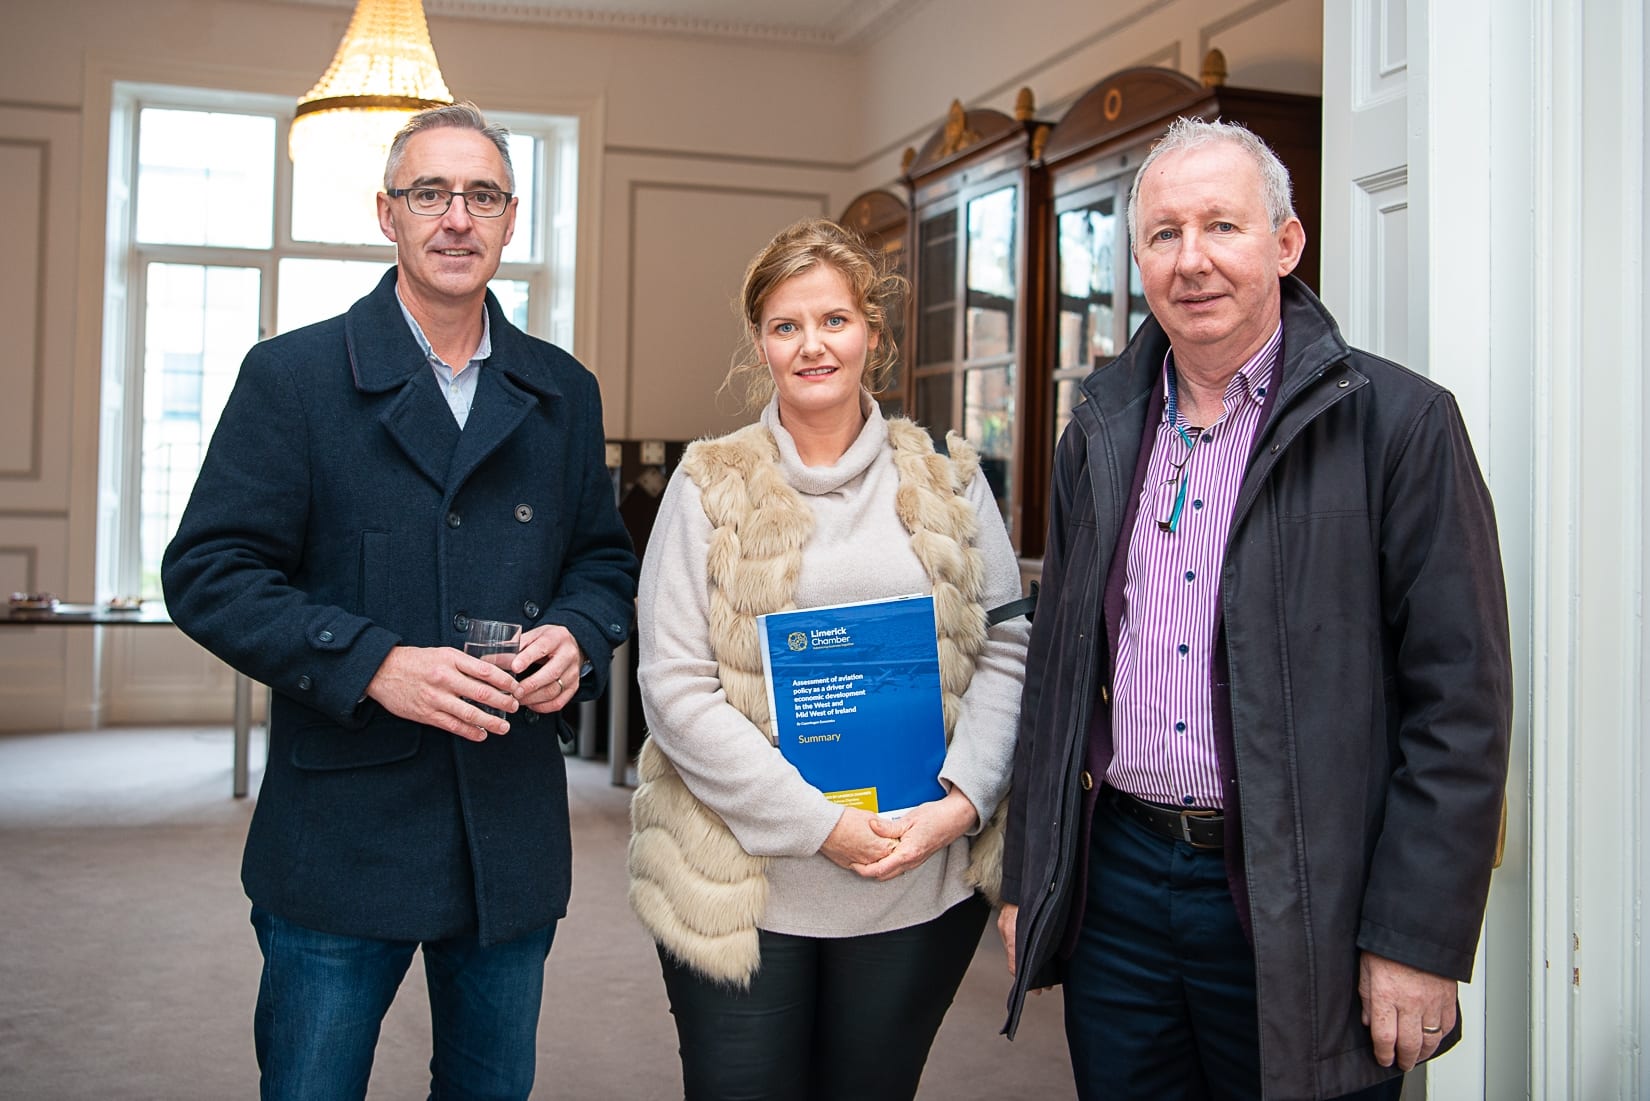 No repro fee-Aviation Impact Report Members Briefing which was held in the Limerick Chamber Boardroom on Tuesday 05th November  - From Left to Right: Niall Harris - Morgan McKinley, Rosemarie No-one - Hunt Museum, Michael Cormack - Limerick 2030 
Photo credit Shauna Kennedy